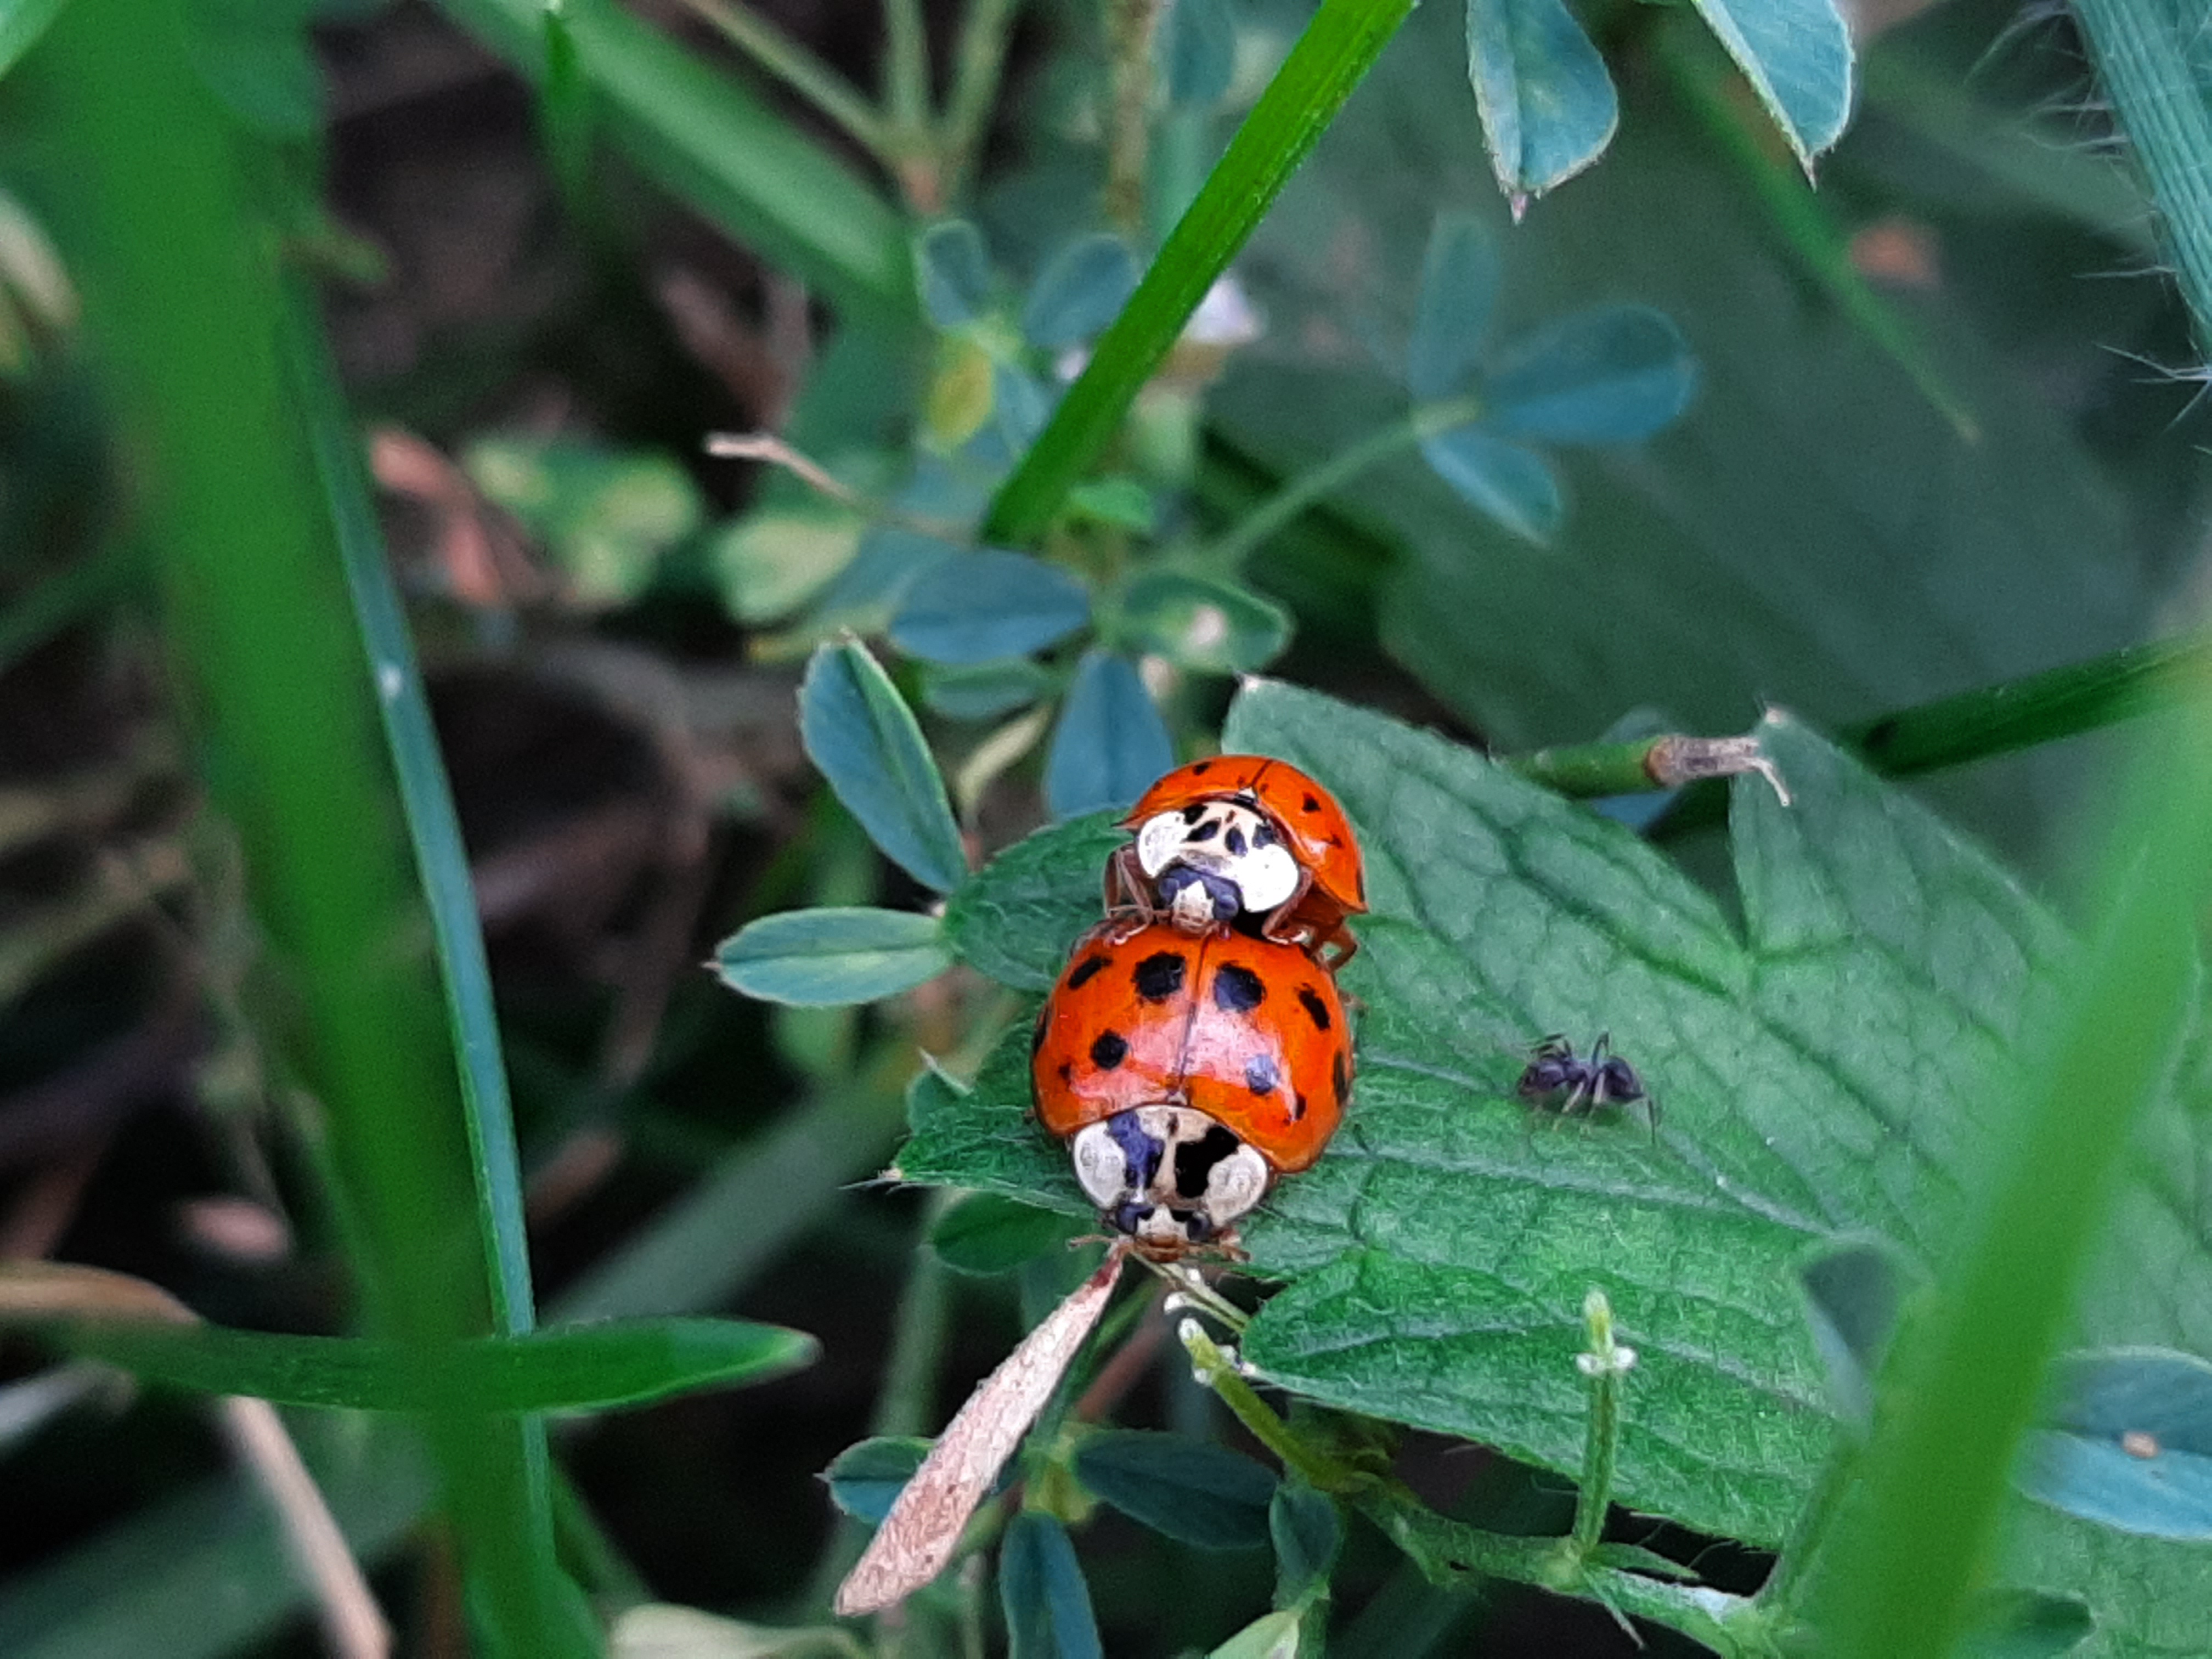 Two ladybugs resting on a green leaf